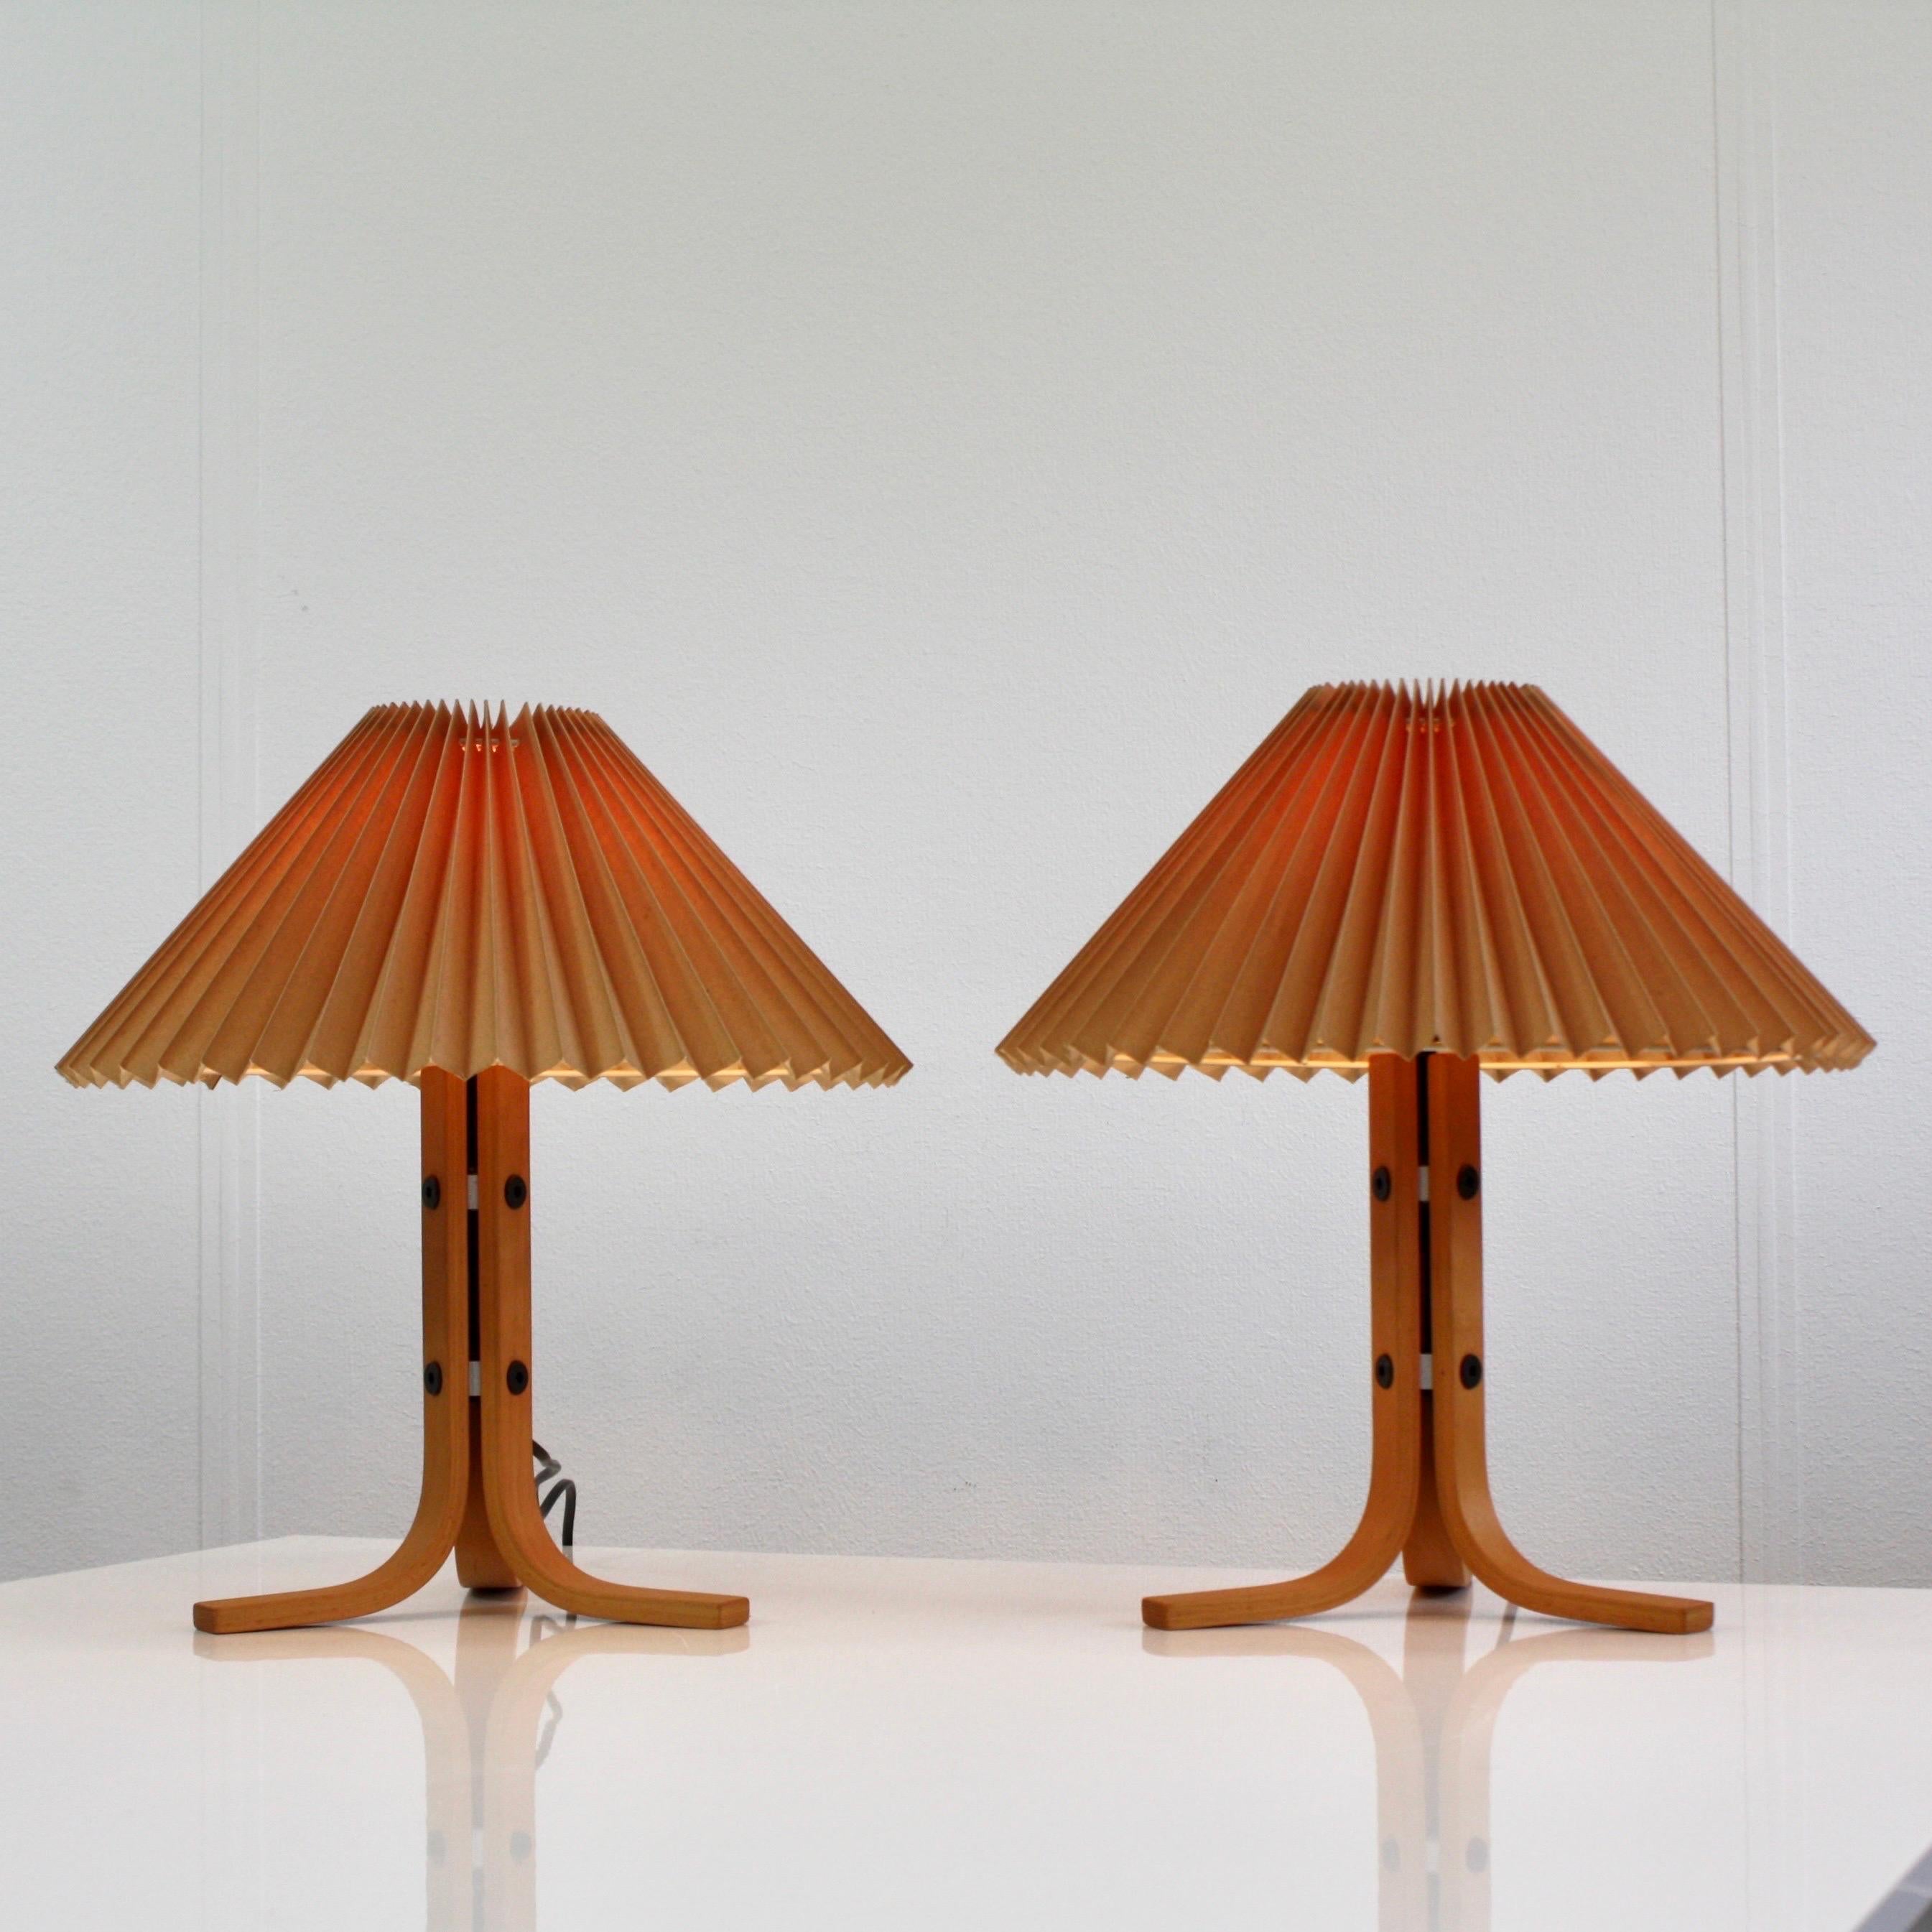 A rare pair of tripod desk lamps by Mads Caprani for Caprani Light in excellent vintage condition. 

* A set of bend veneer tripod desk lamps with a pleated fabric shade
* Designer: Mads Caprani
* Model: 225
* Manufacturer: Caprani Light A/S Denmark